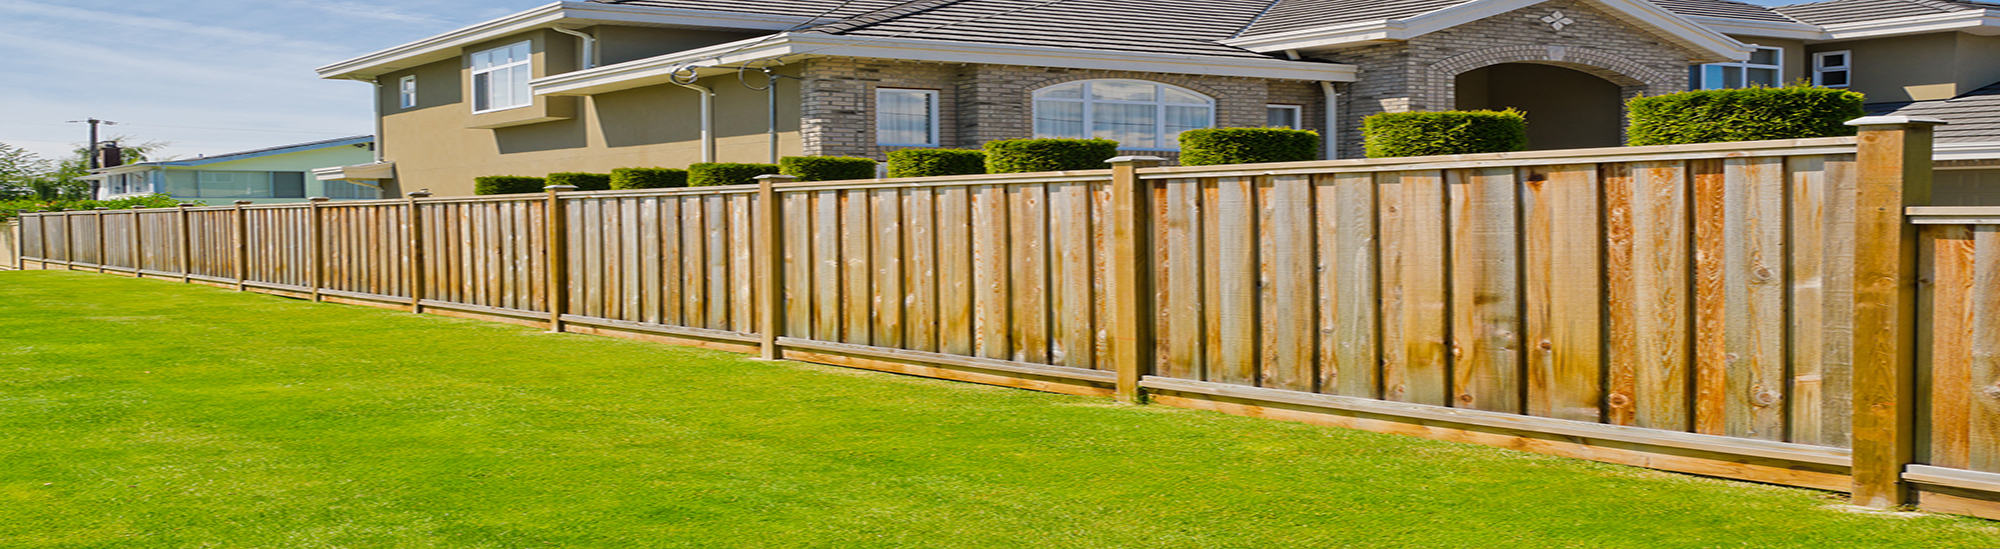 Who Pays for Fence Replacement?